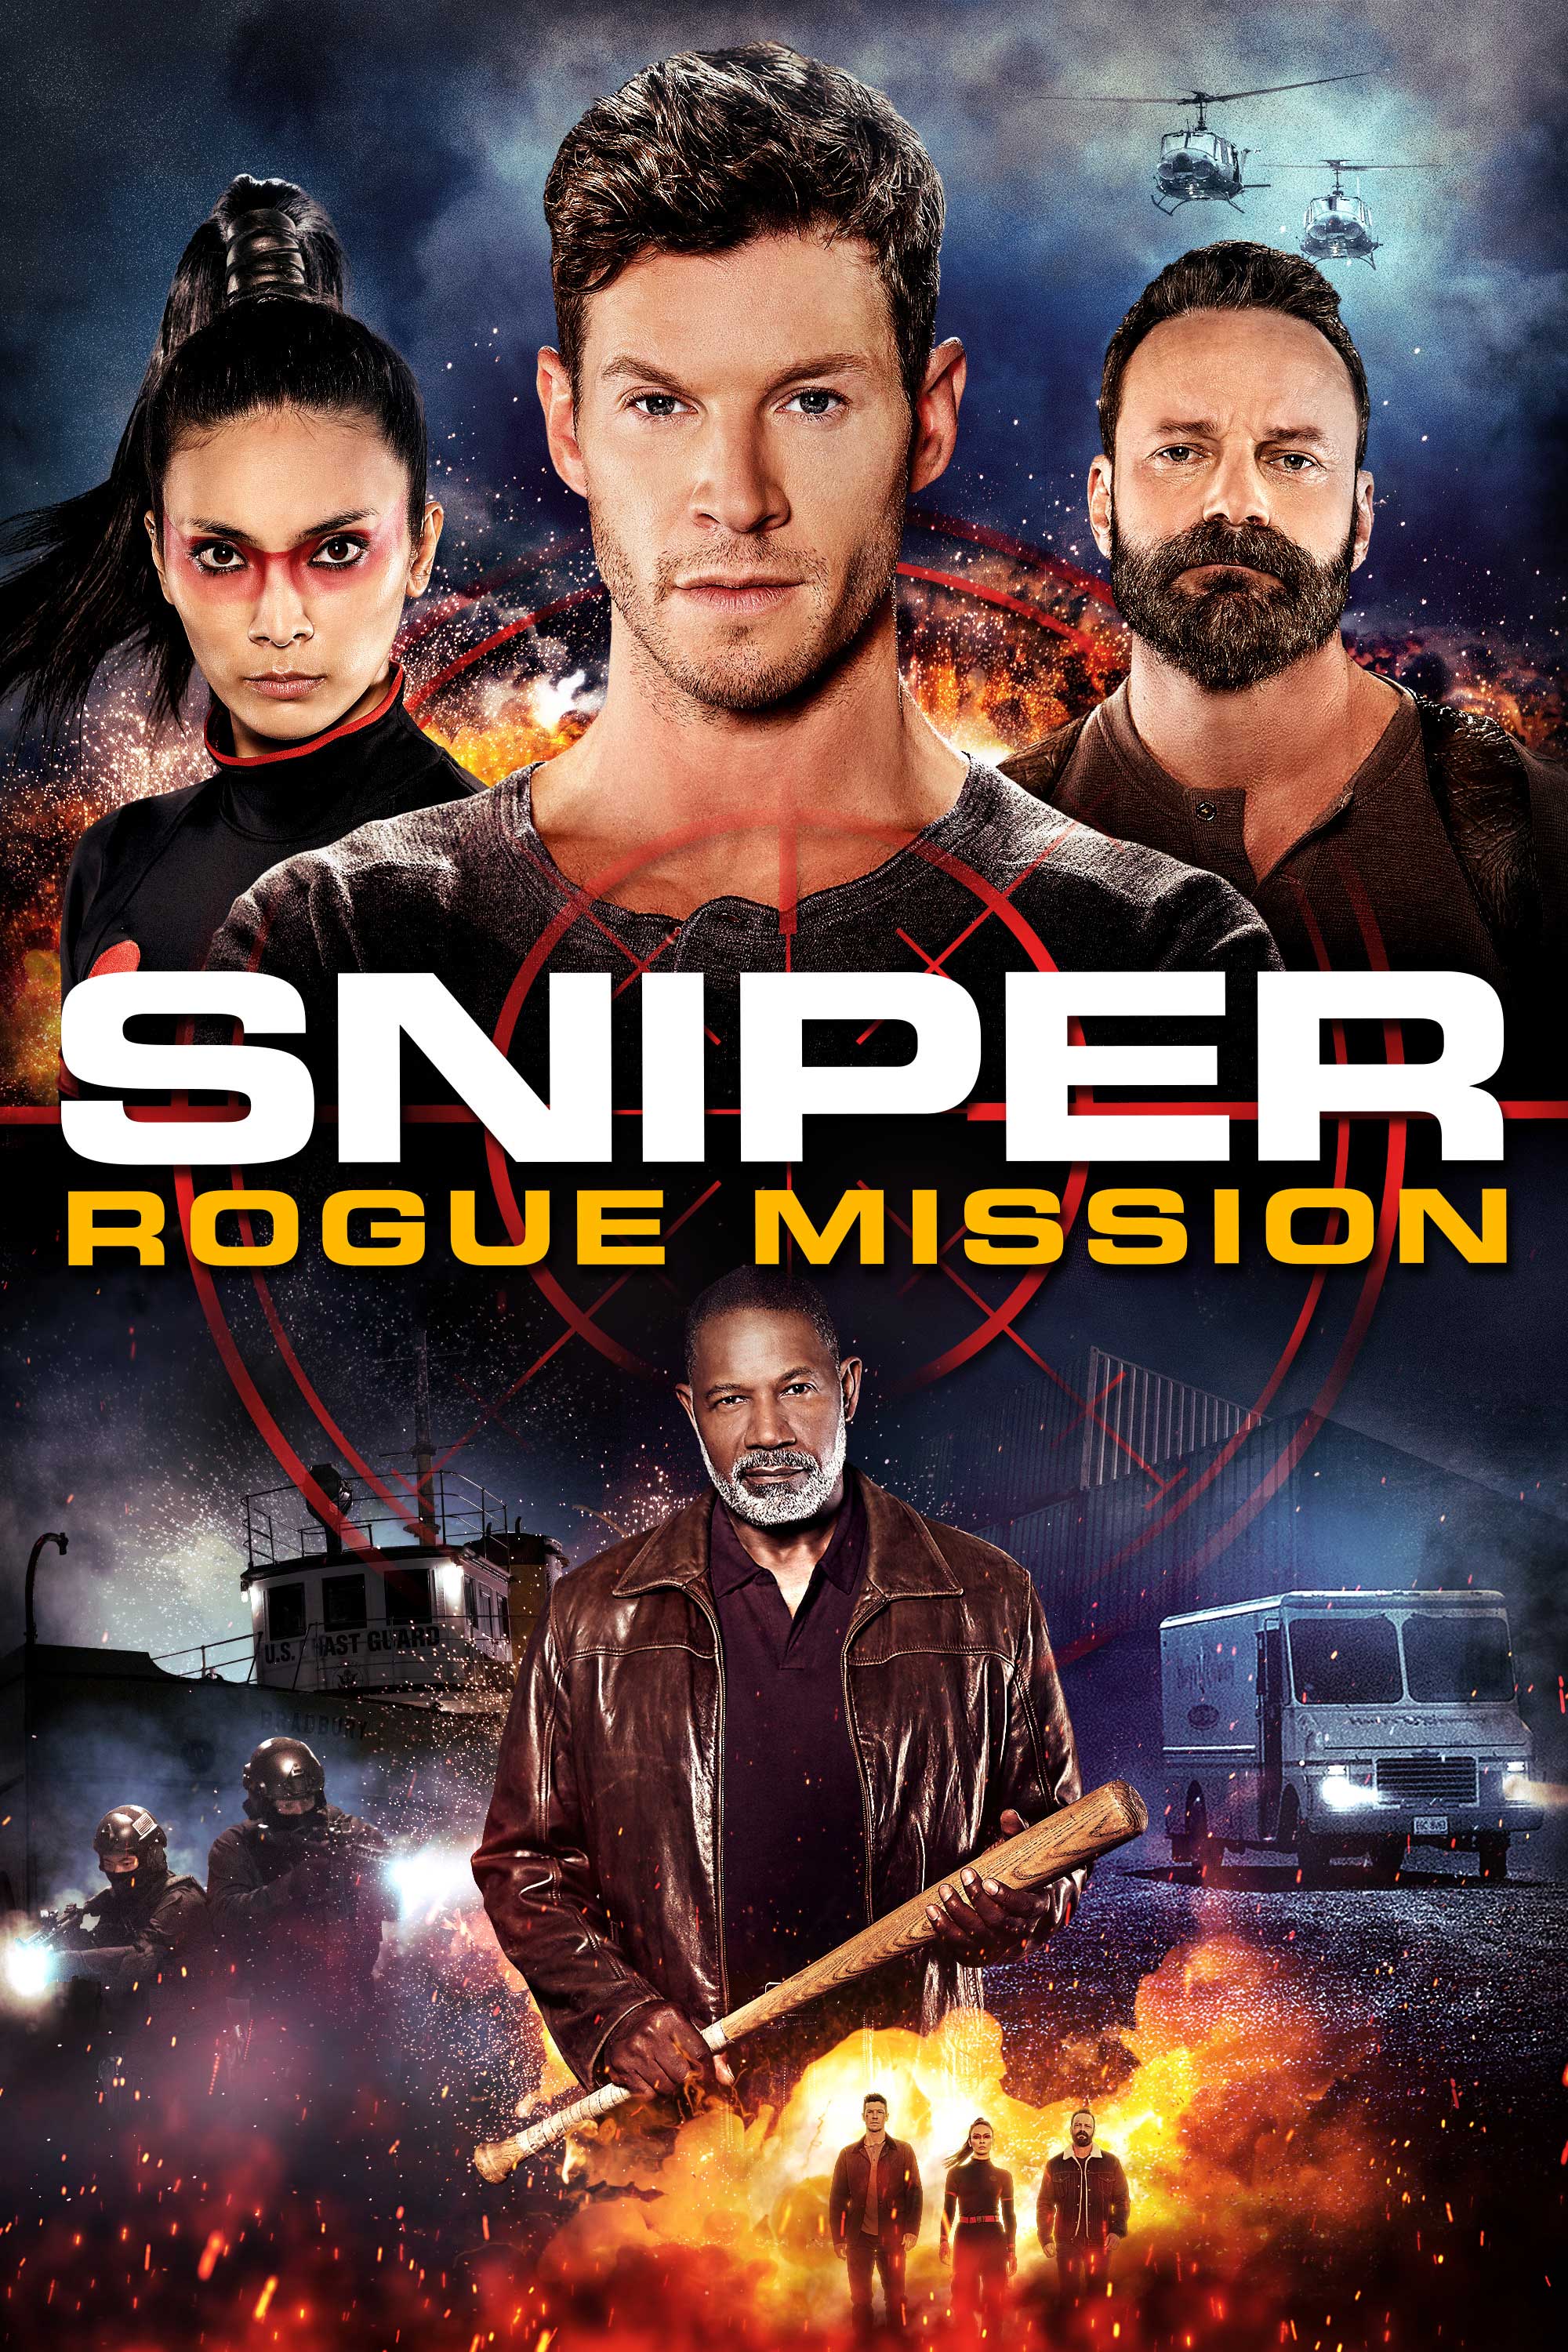 Sniper Rogue Mission Trailer & Poster